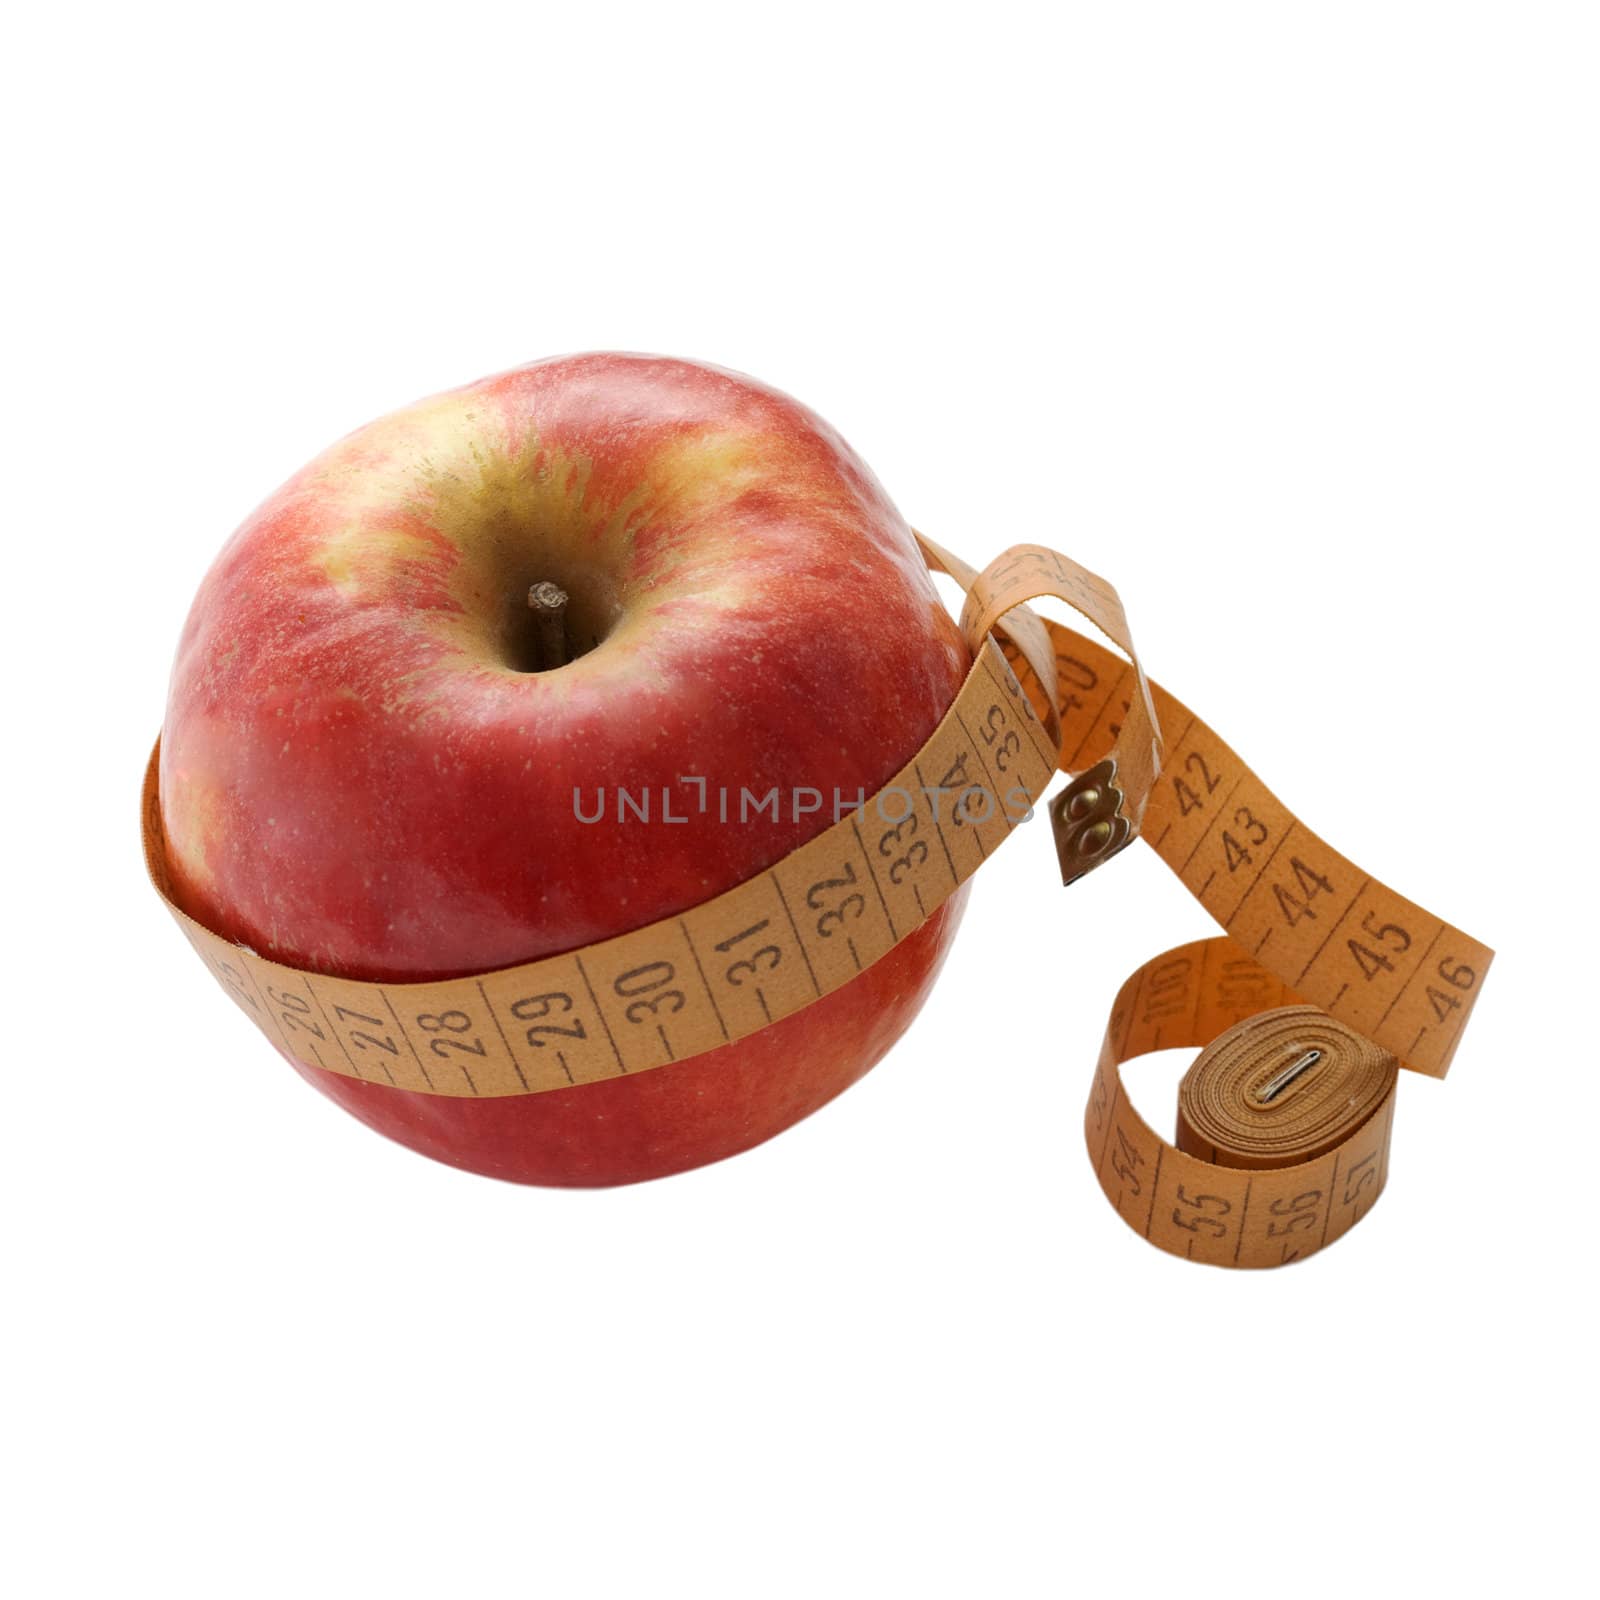 Red apple with measuring tape on the white background